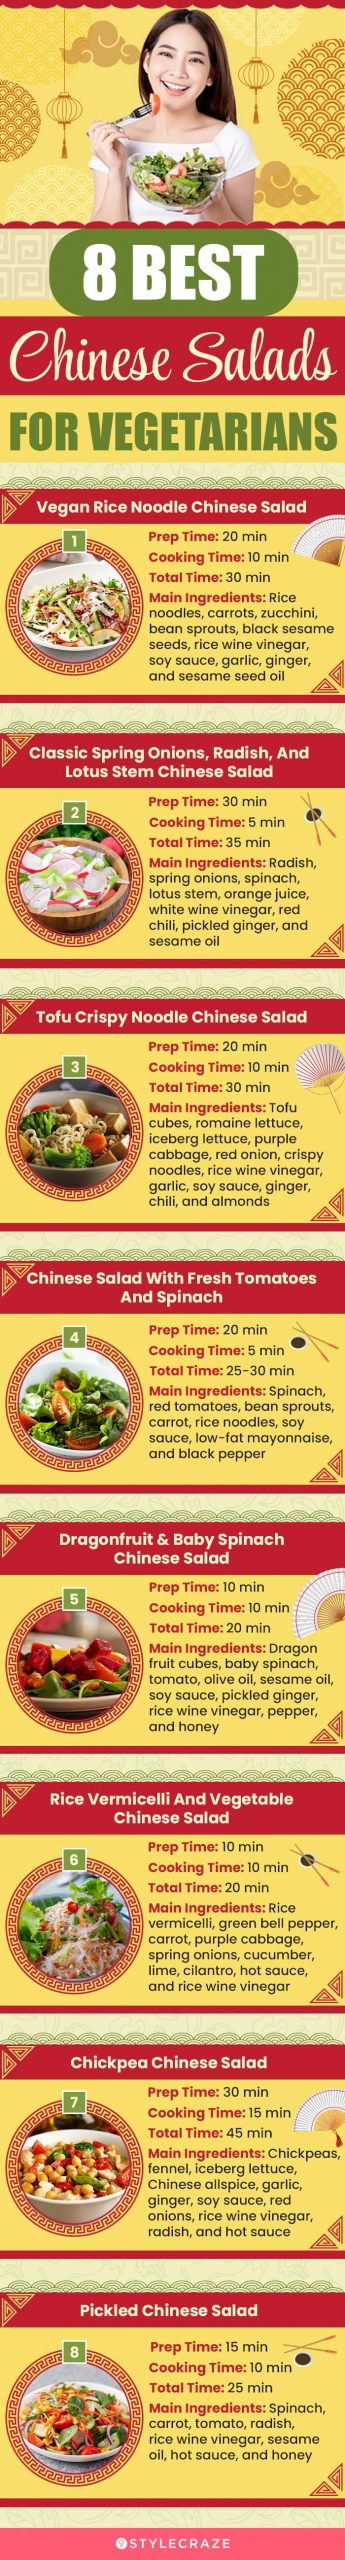 8 best chinese salads for vegetarians (infographic)